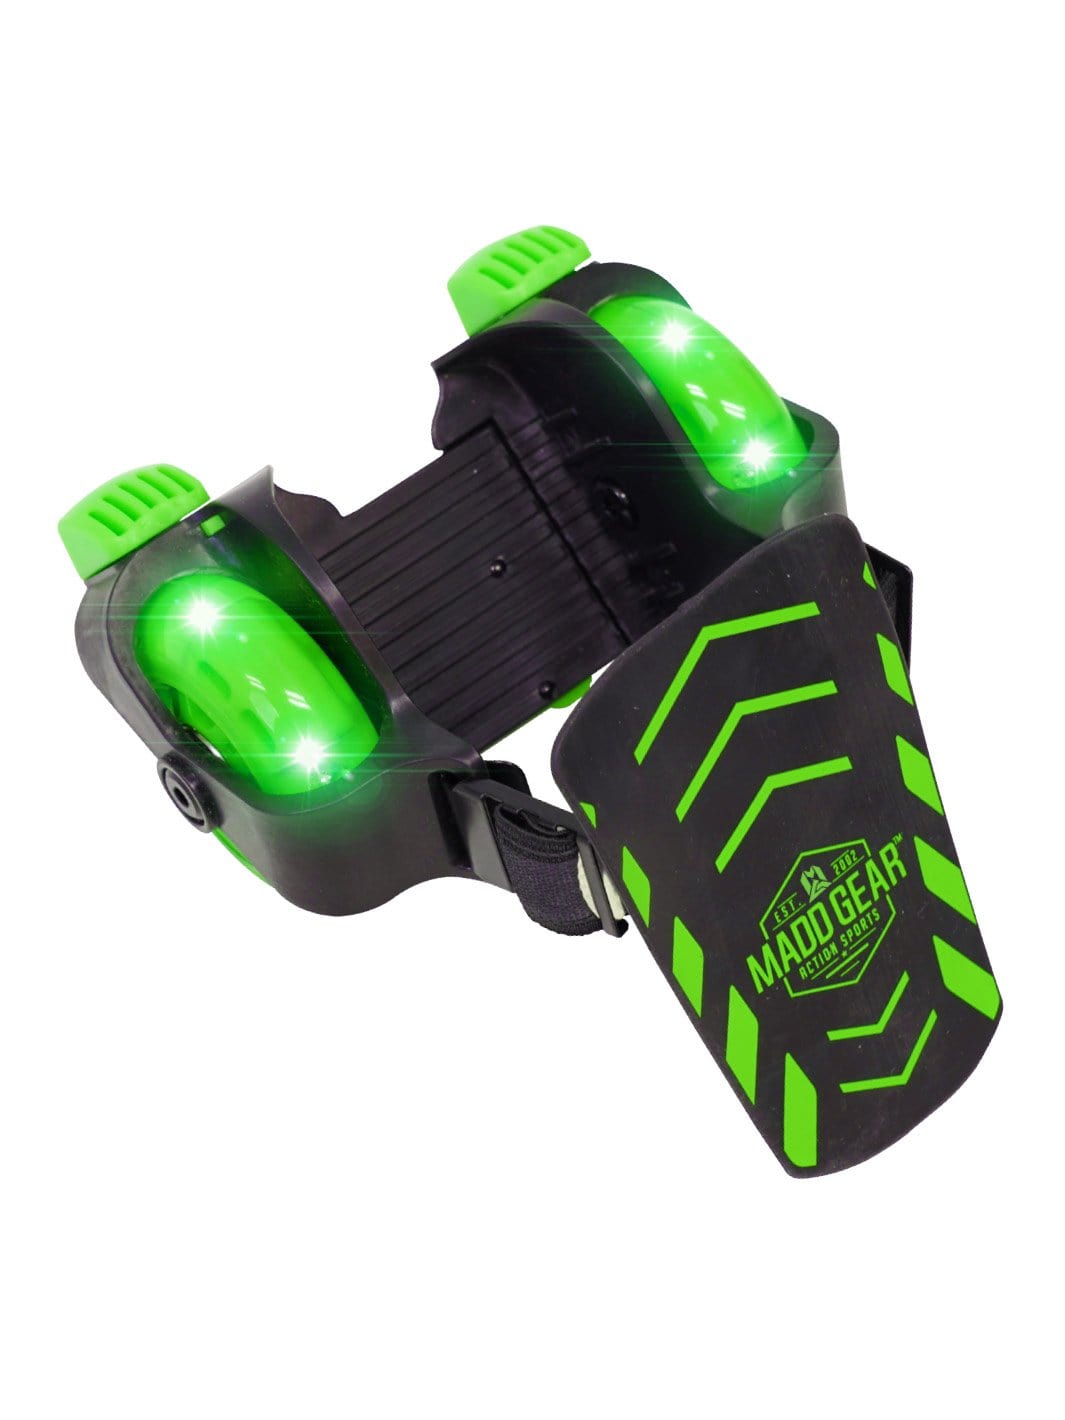 Madd Light-Up Rollers - Green - Madd Gear Global | Est 2002